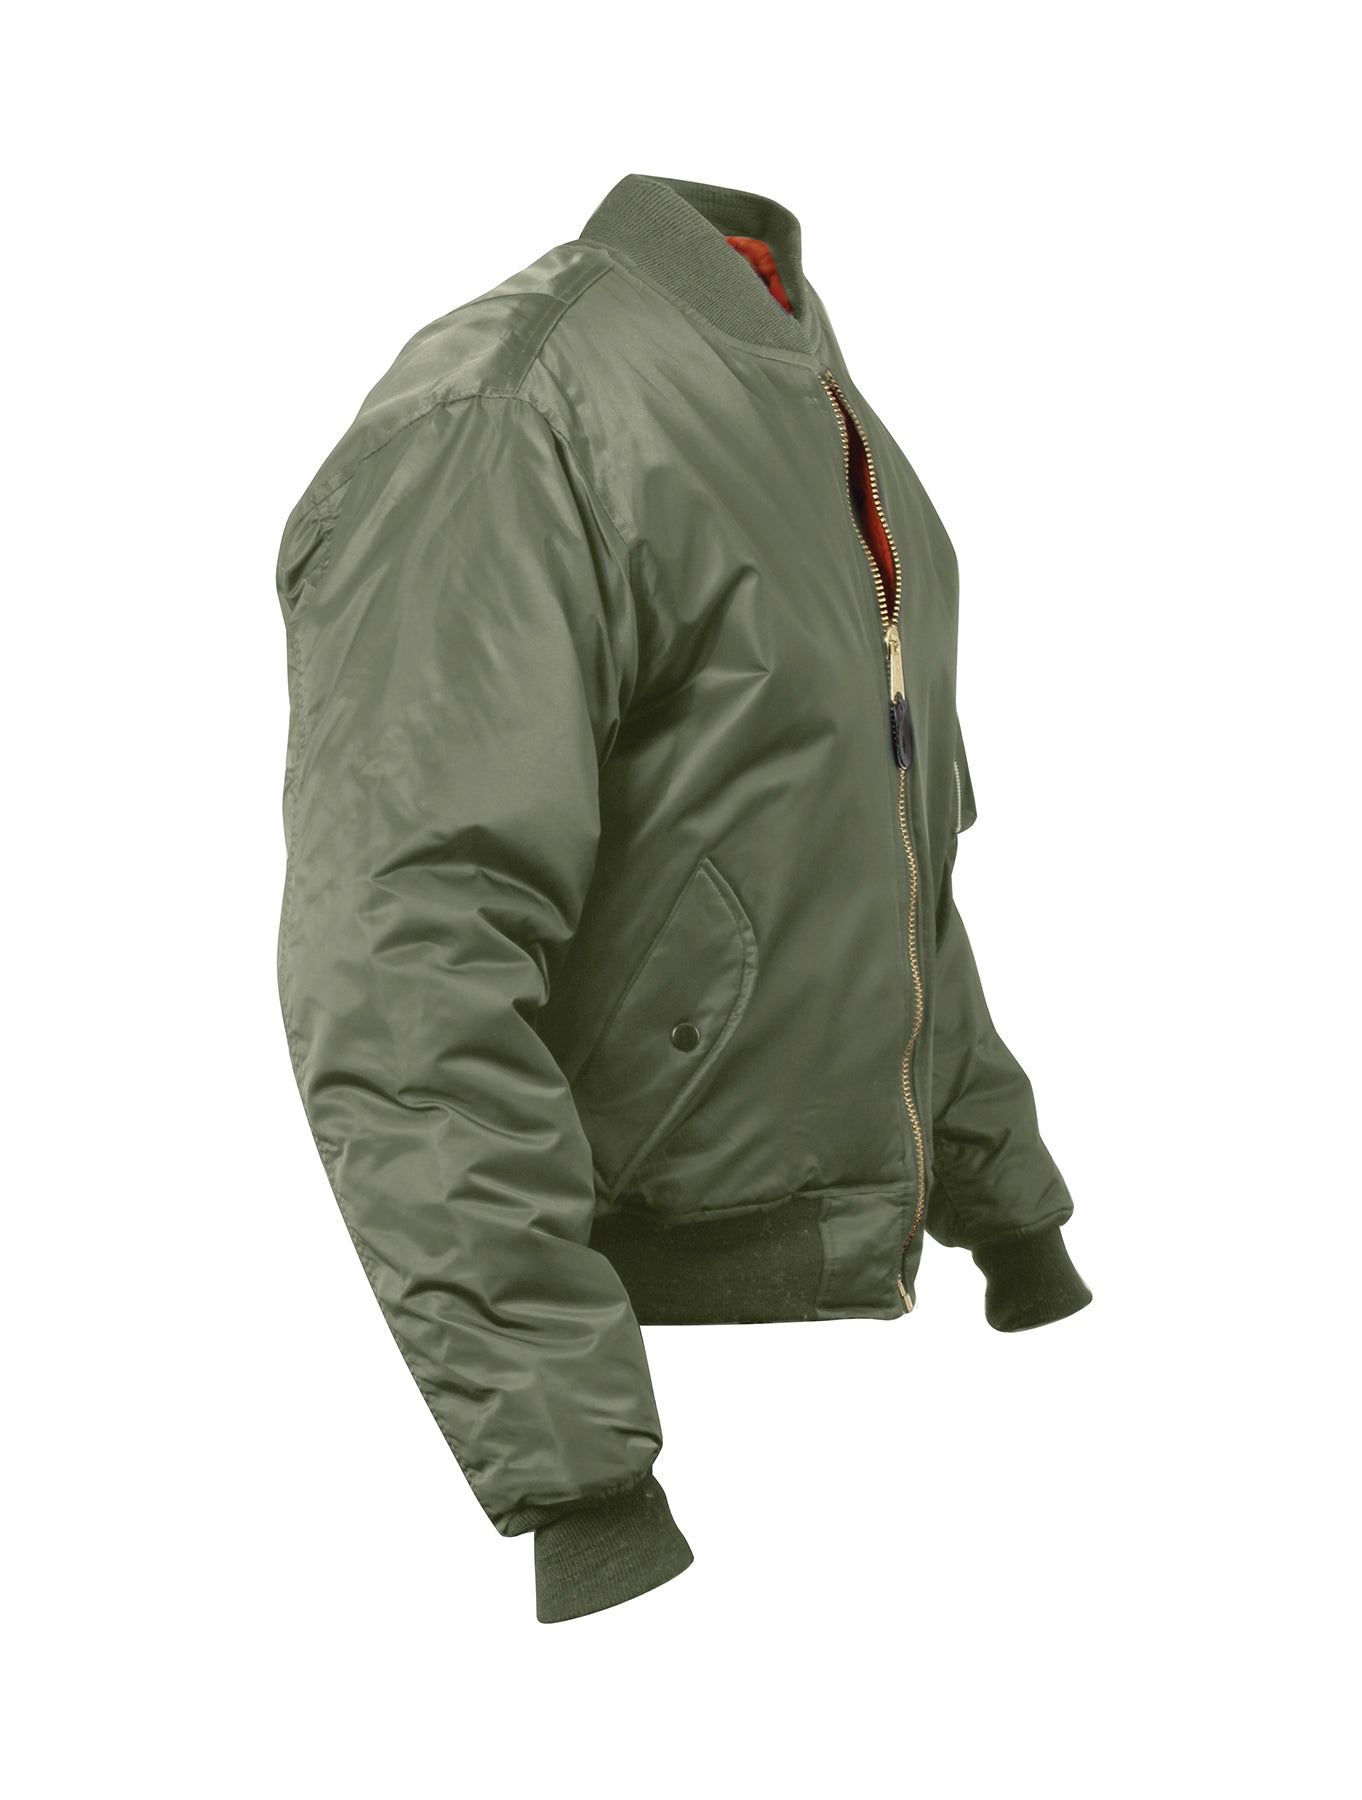 Rothco Concealed Carry MA-1 Flight Jacket - Sage Green